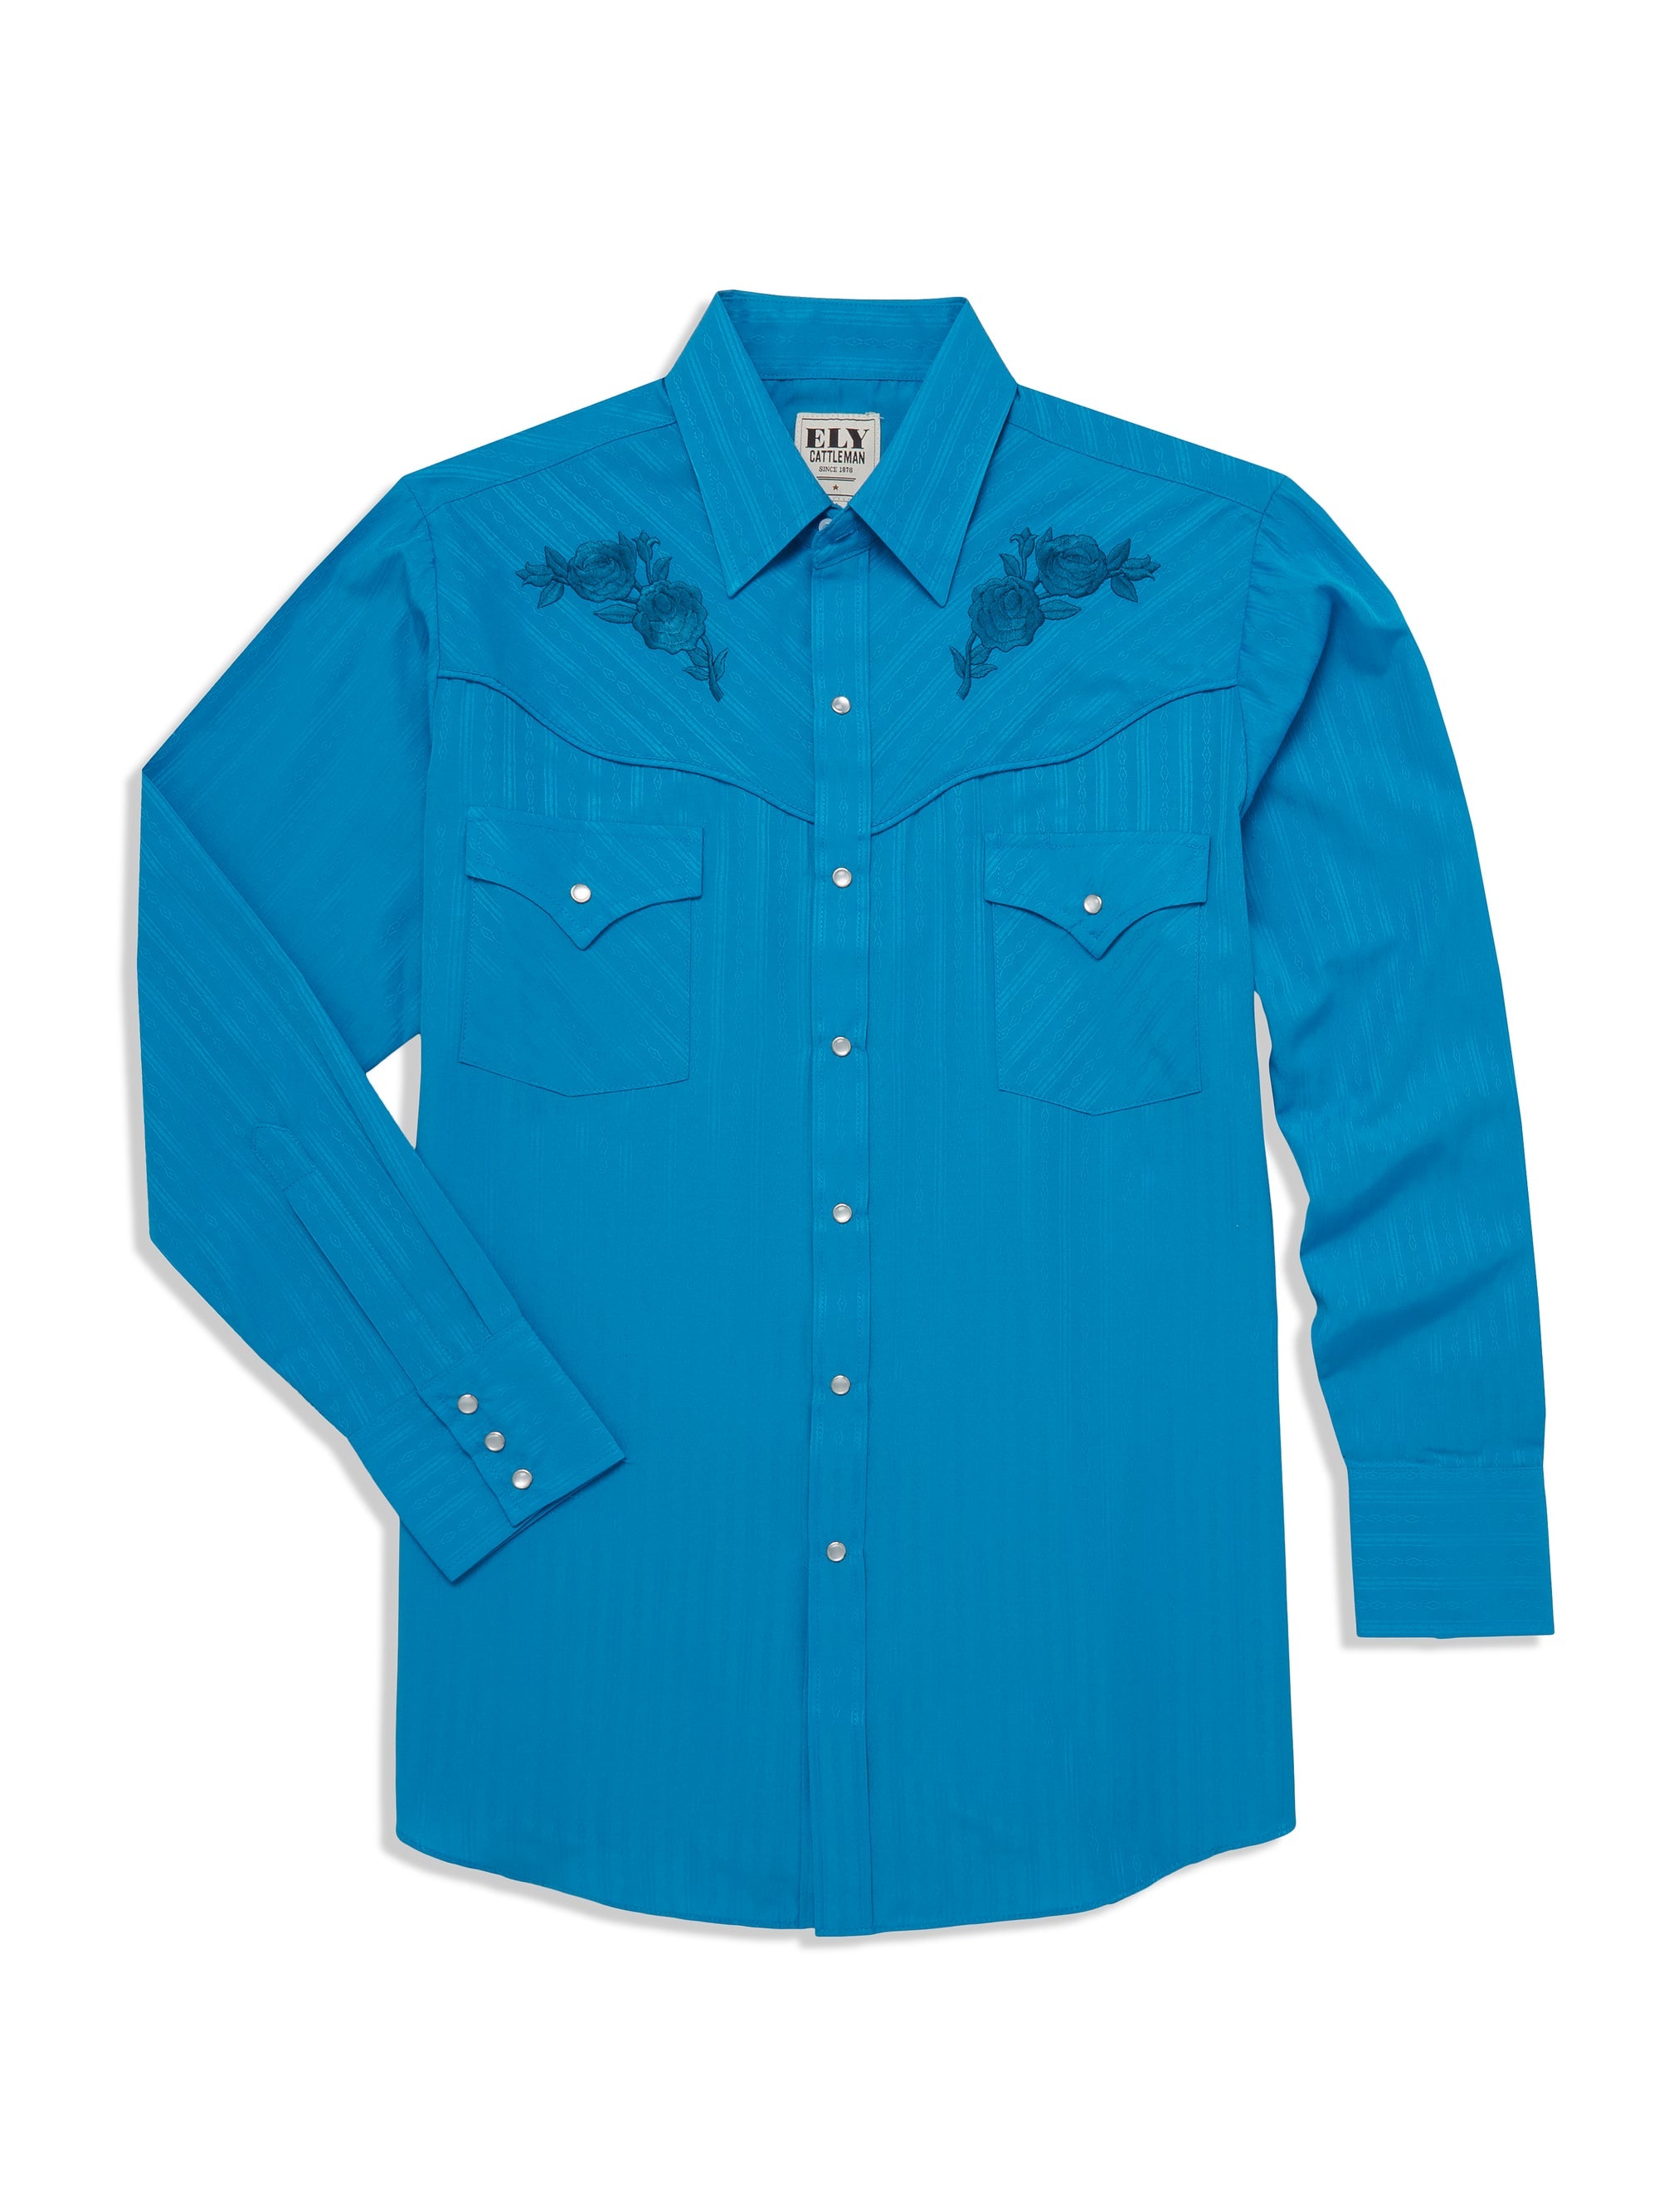 Men's Turquoise Western Shirt w/ Embroidery